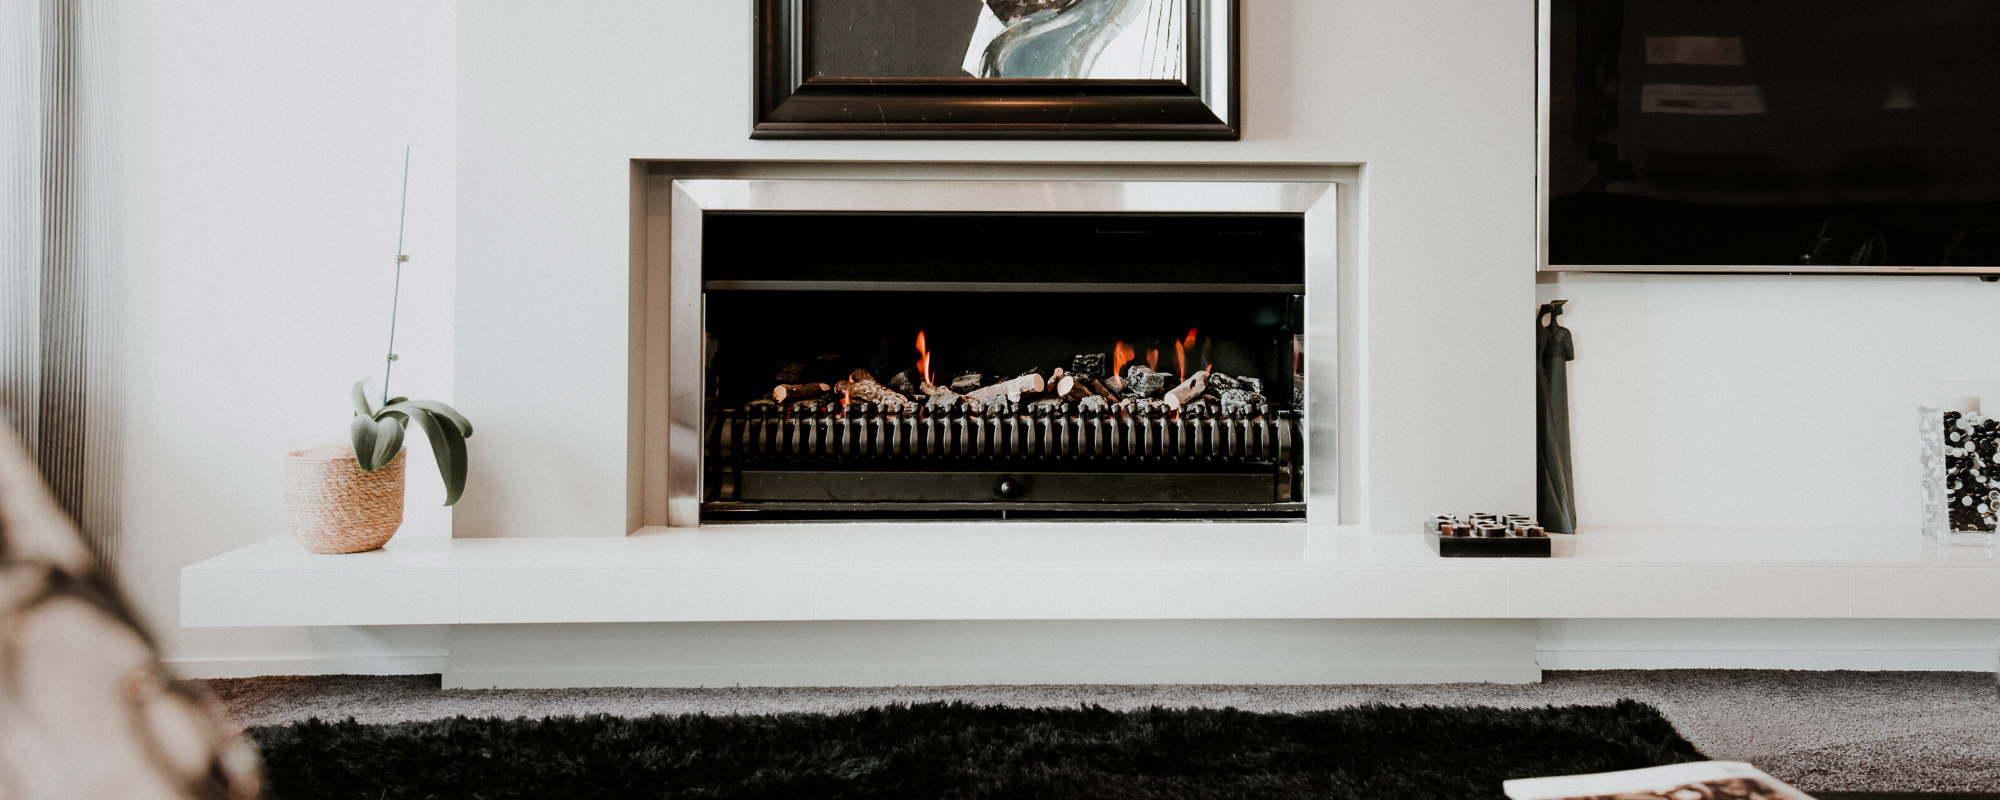 Decorative gas log fire in white room